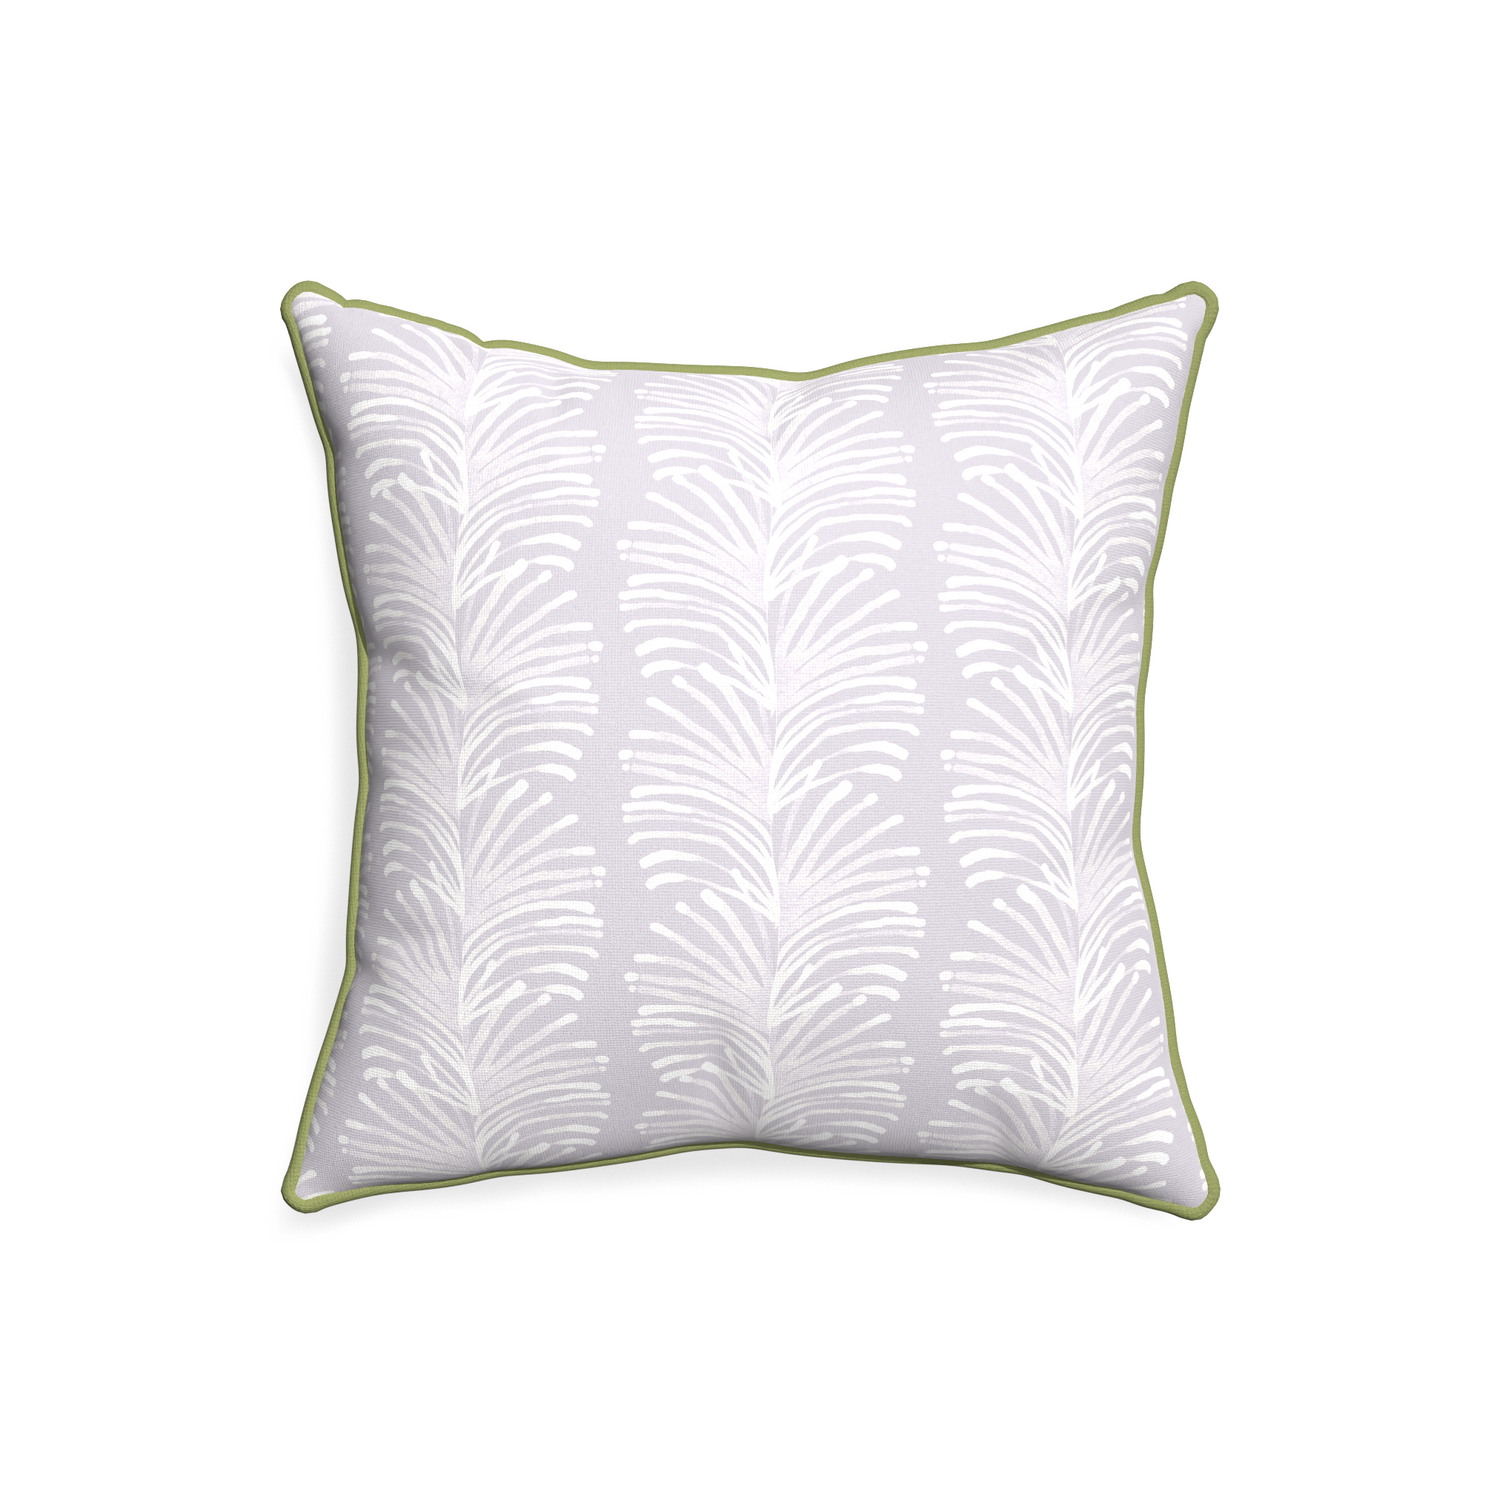 20-square emma lavender custom pillow with moss piping on white background